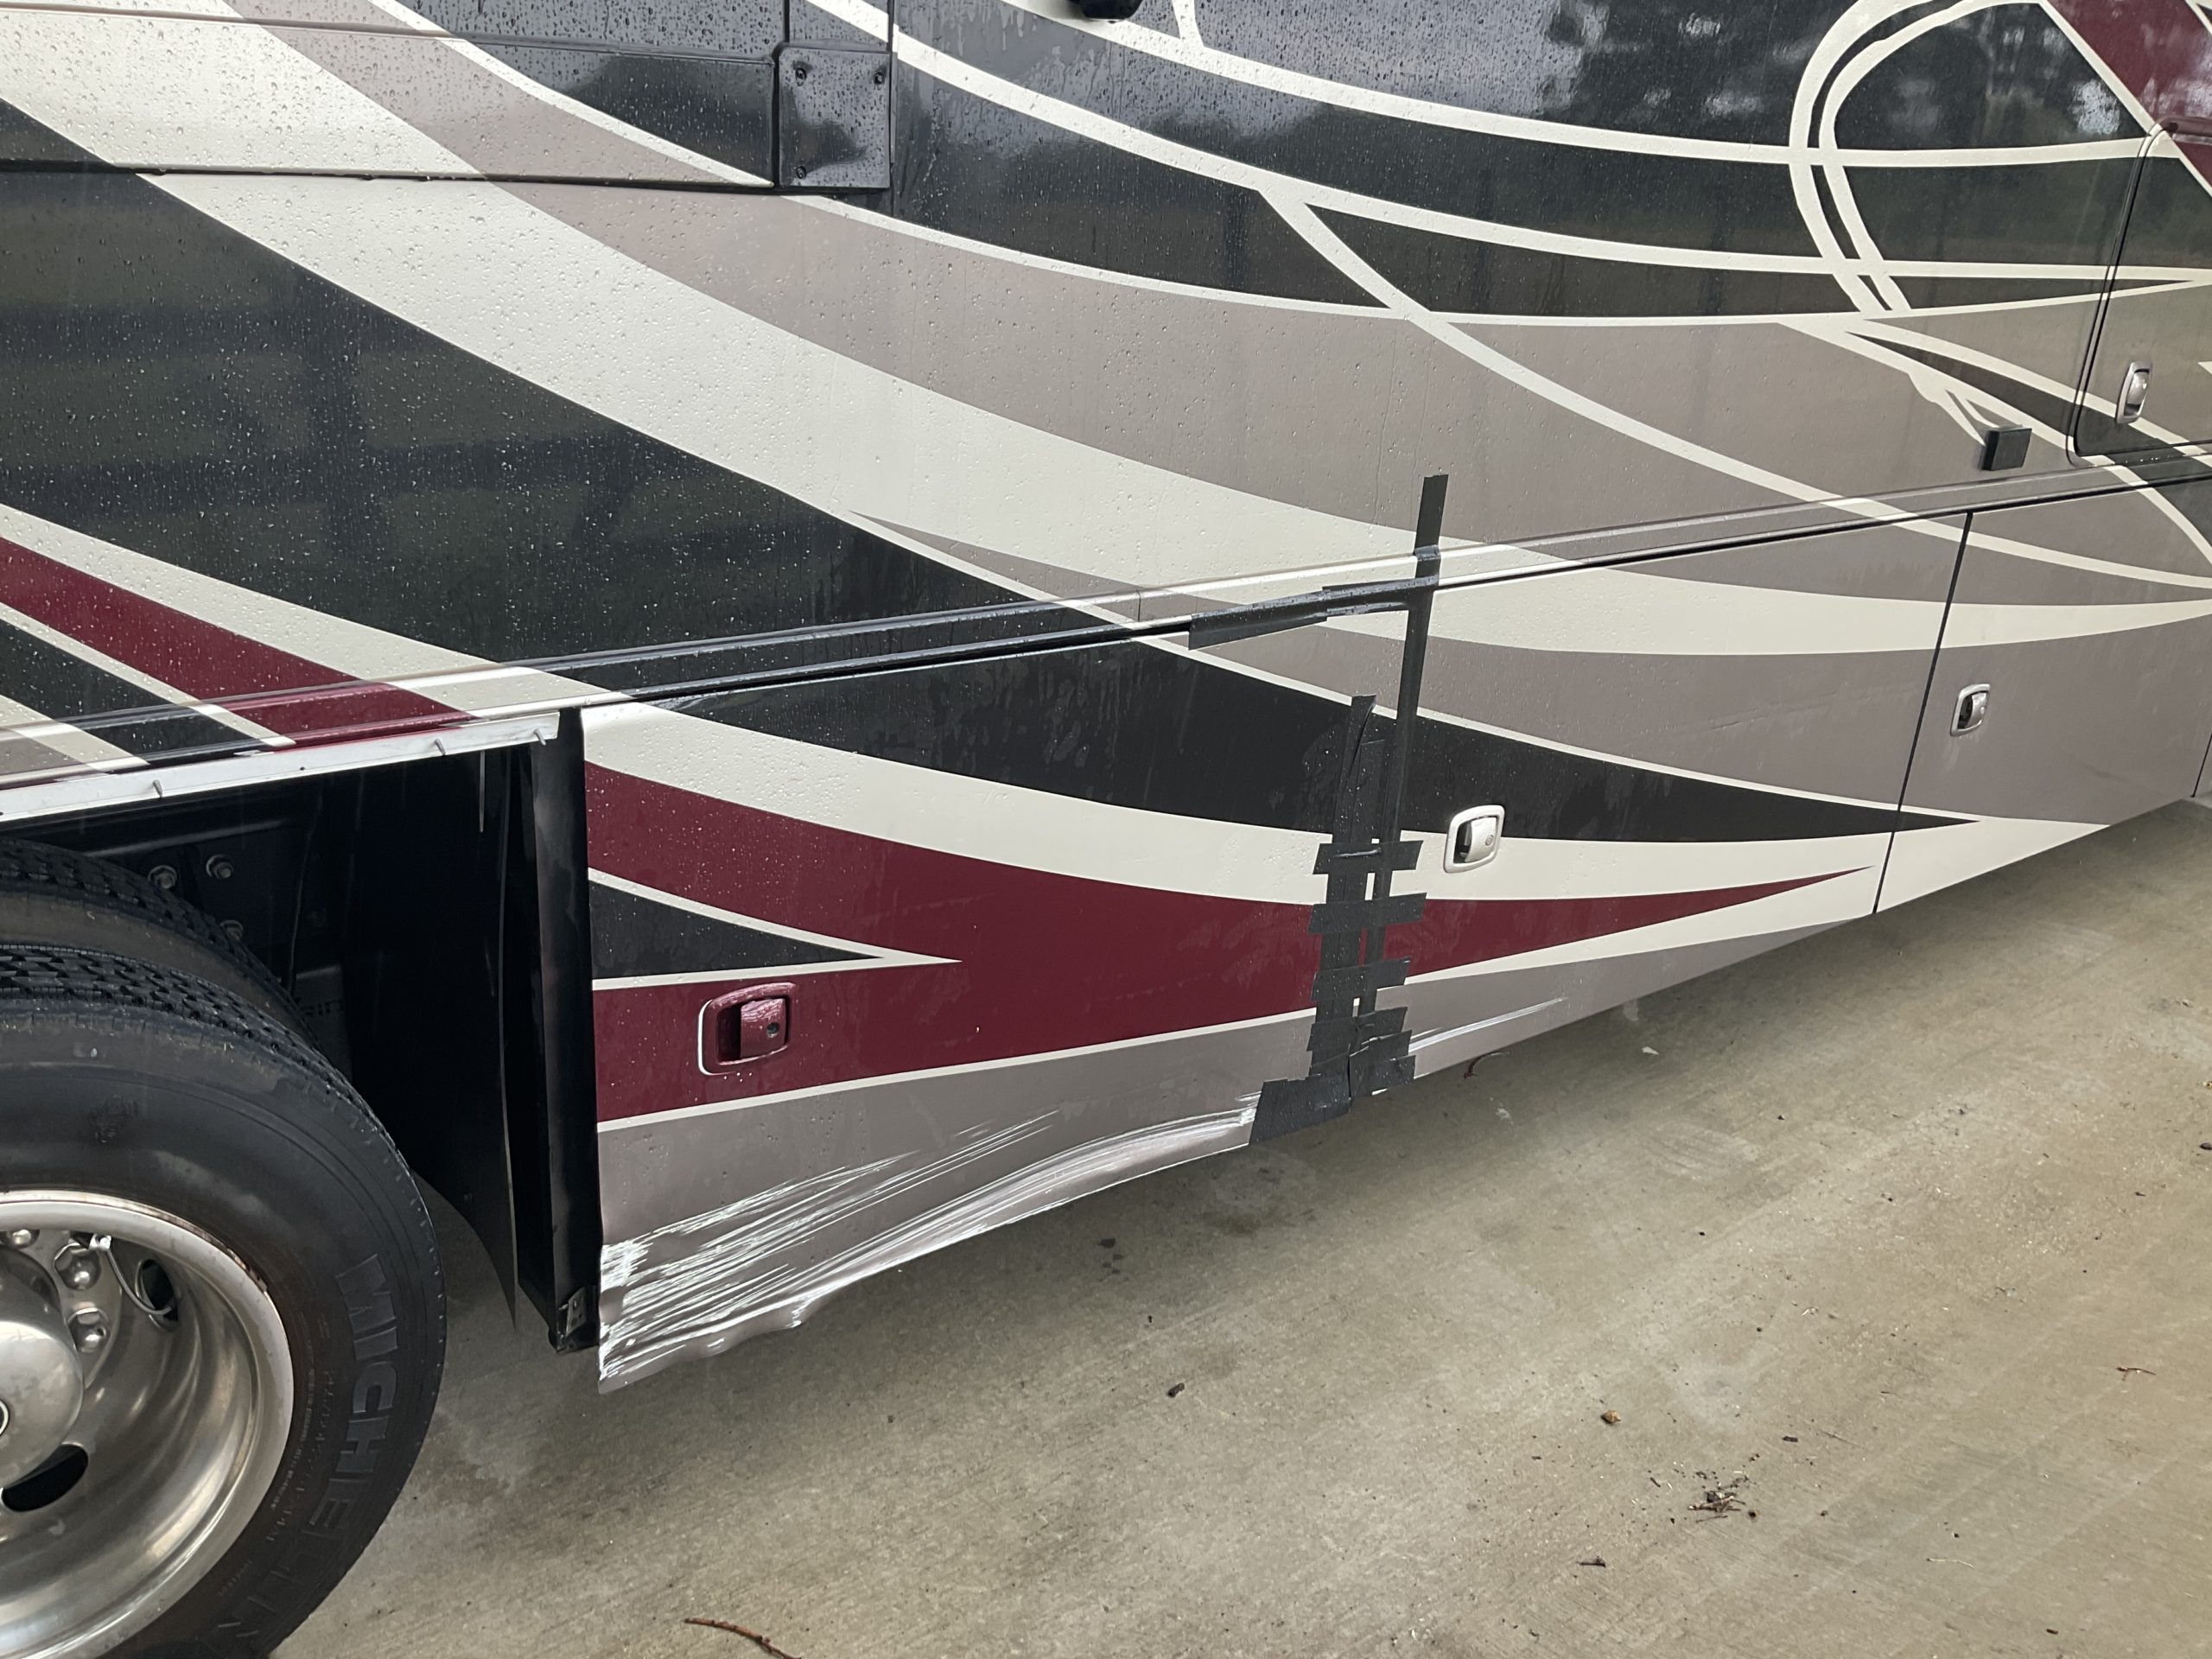 scratched and dented rv from sideswipe